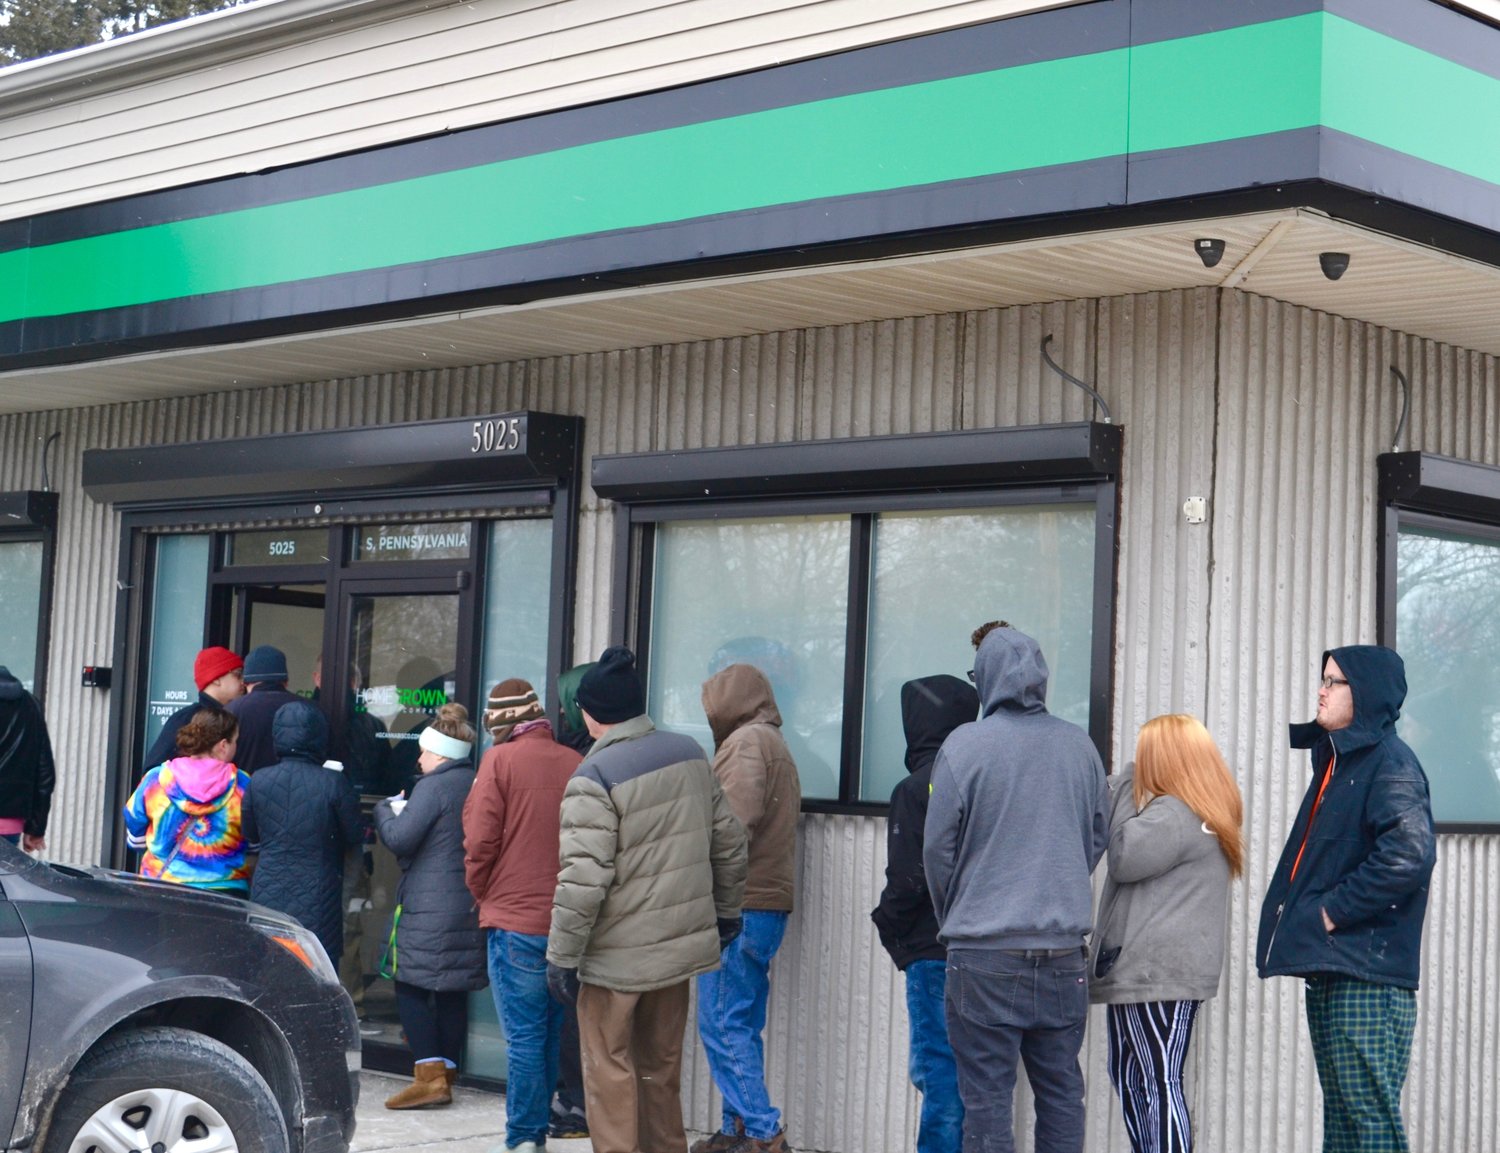 Customers lined up Feb. 28 at Homegrown, the first provisioning center in Lansing to sell recreational marijuana.